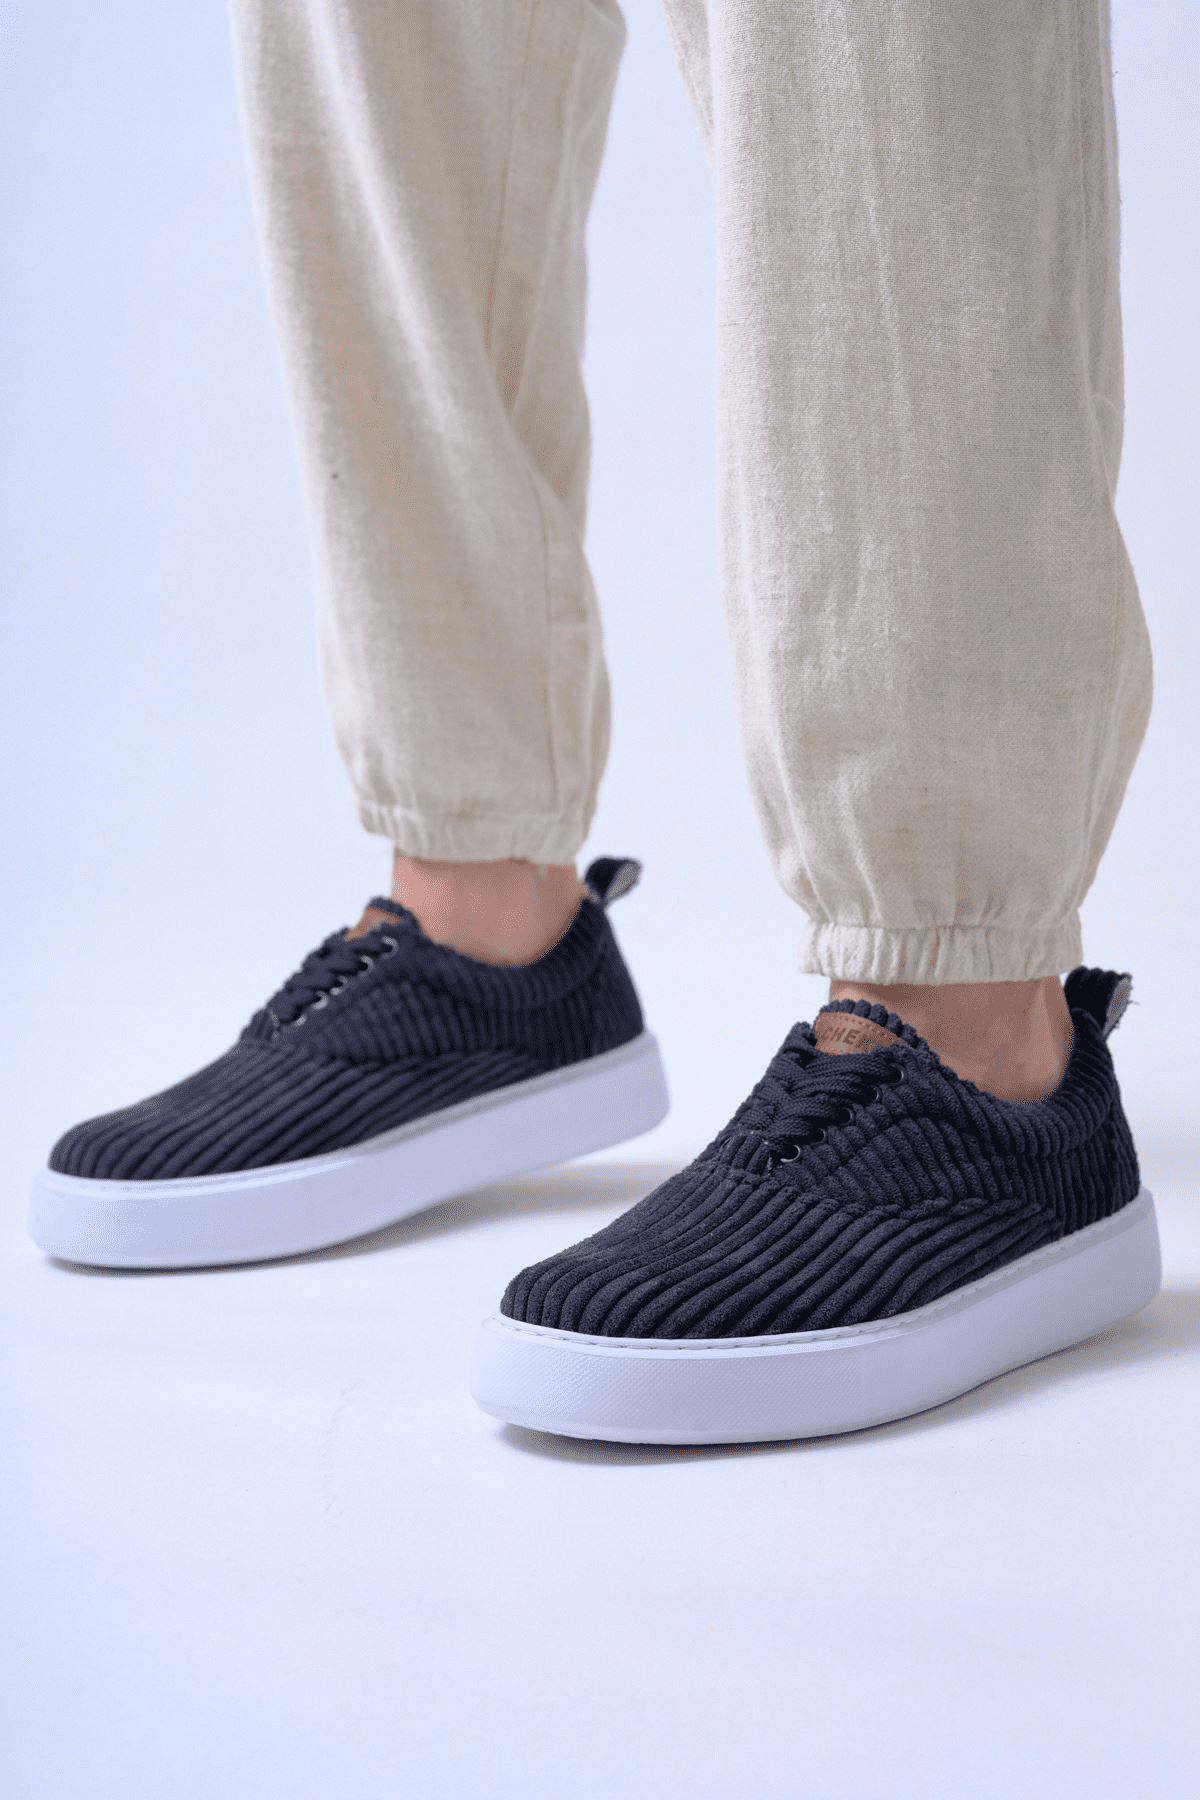 Chekich Casual Men's Shoes Black Color Lace-Up Knitting Fabric Material Comfortable Use Summer Spring Season Sneakers CH173 ST